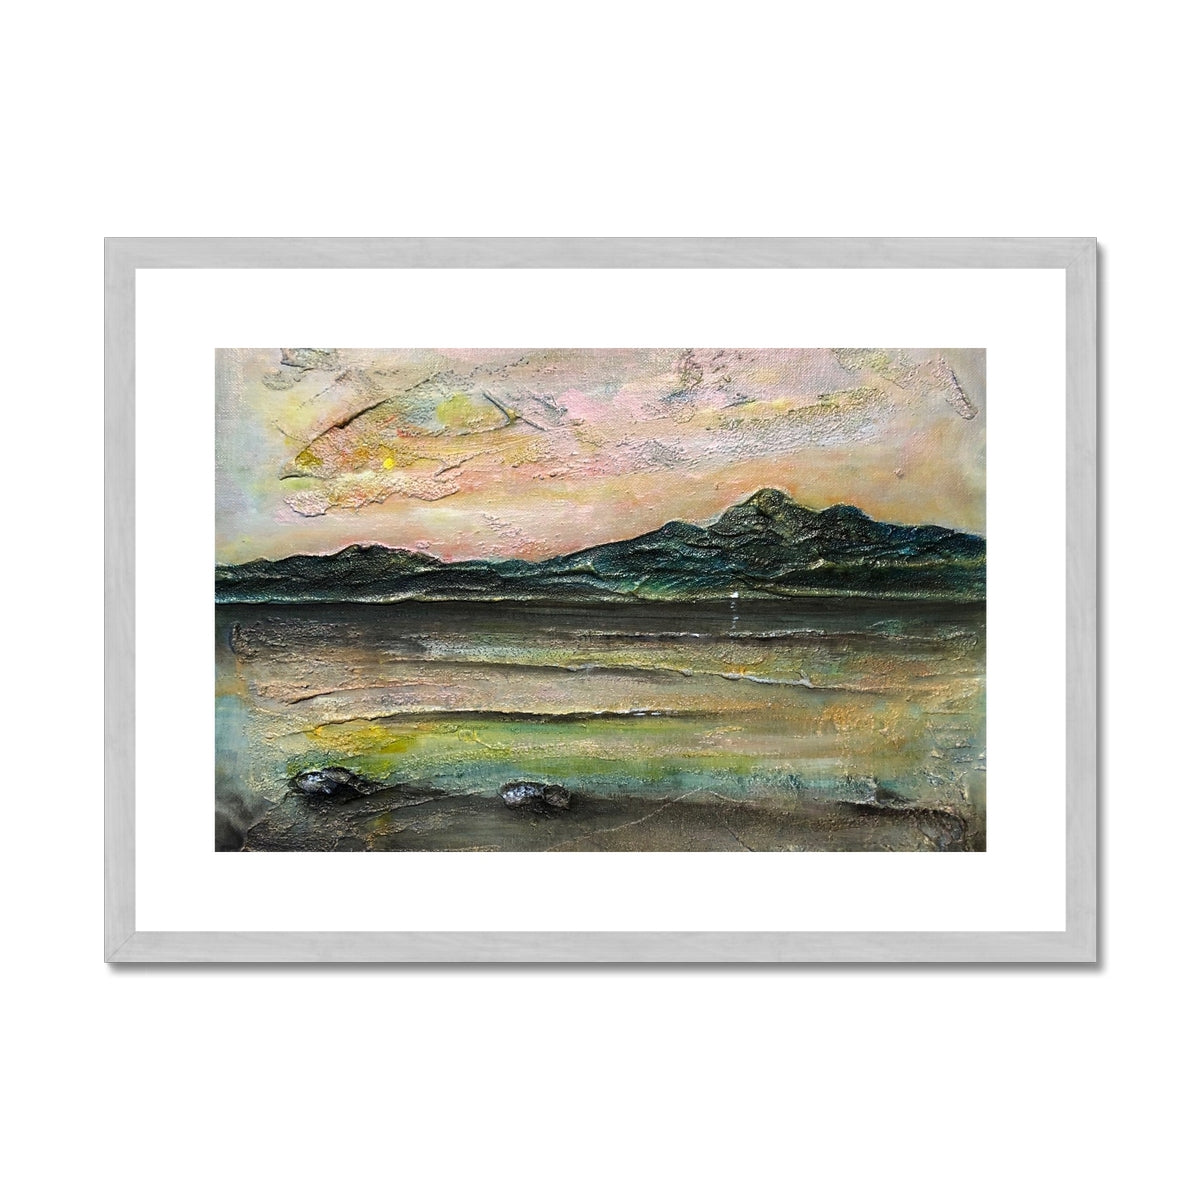 An Ethereal Loch Na Dal Skye Painting | Antique Framed & Mounted Prints From Scotland-Antique Framed & Mounted Prints-Scottish Lochs & Mountains Art Gallery-A2 Landscape-Silver Frame-Paintings, Prints, Homeware, Art Gifts From Scotland By Scottish Artist Kevin Hunter